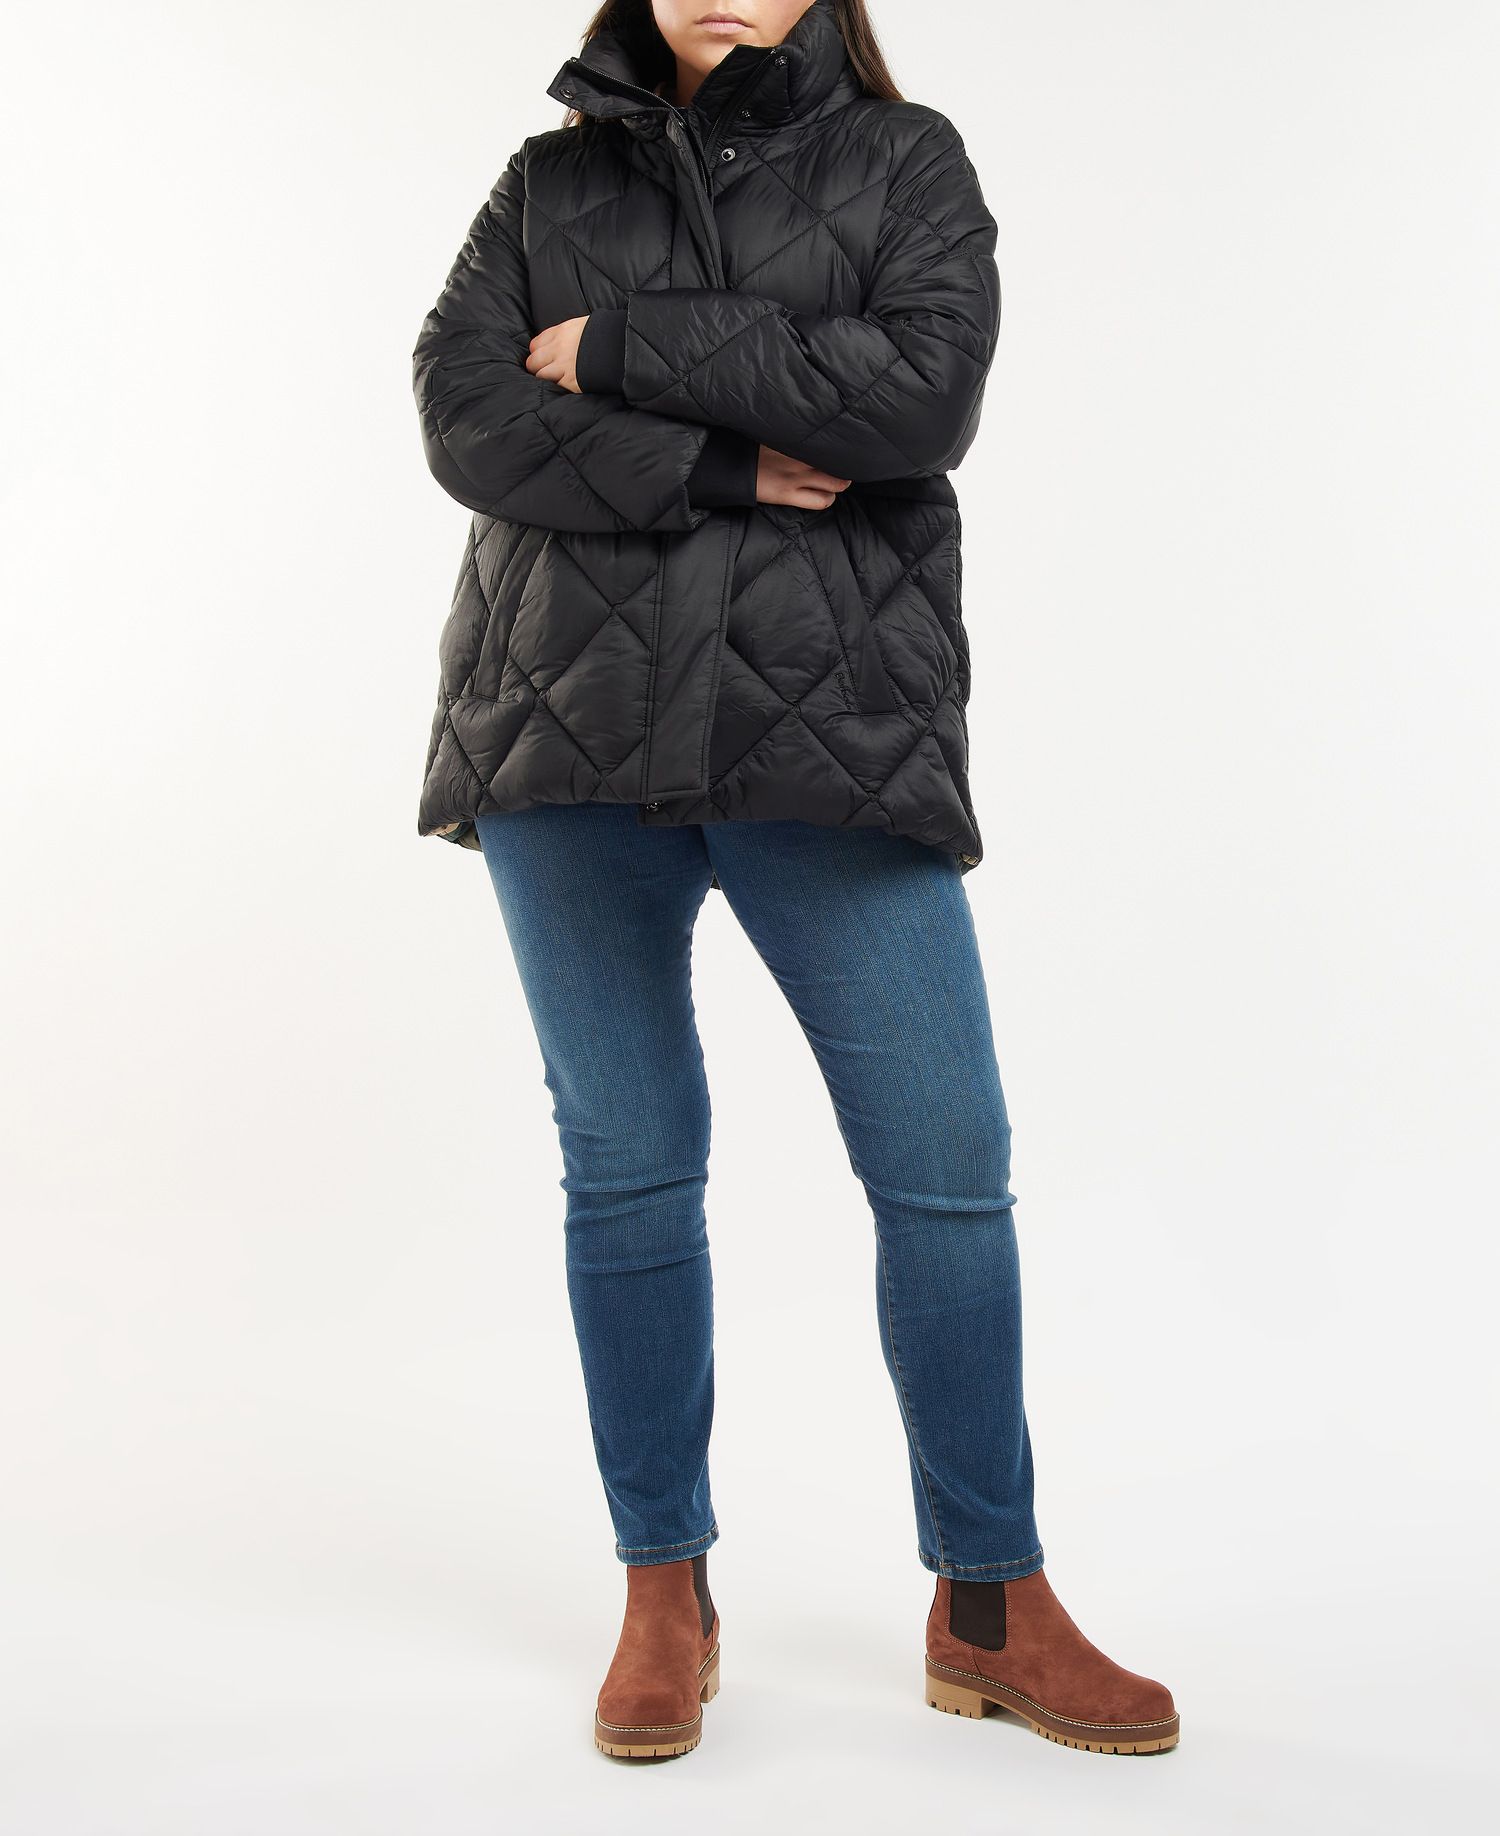 Shop the Barbour Hoxa Plus Size Quilted Jacket today. | Barbour